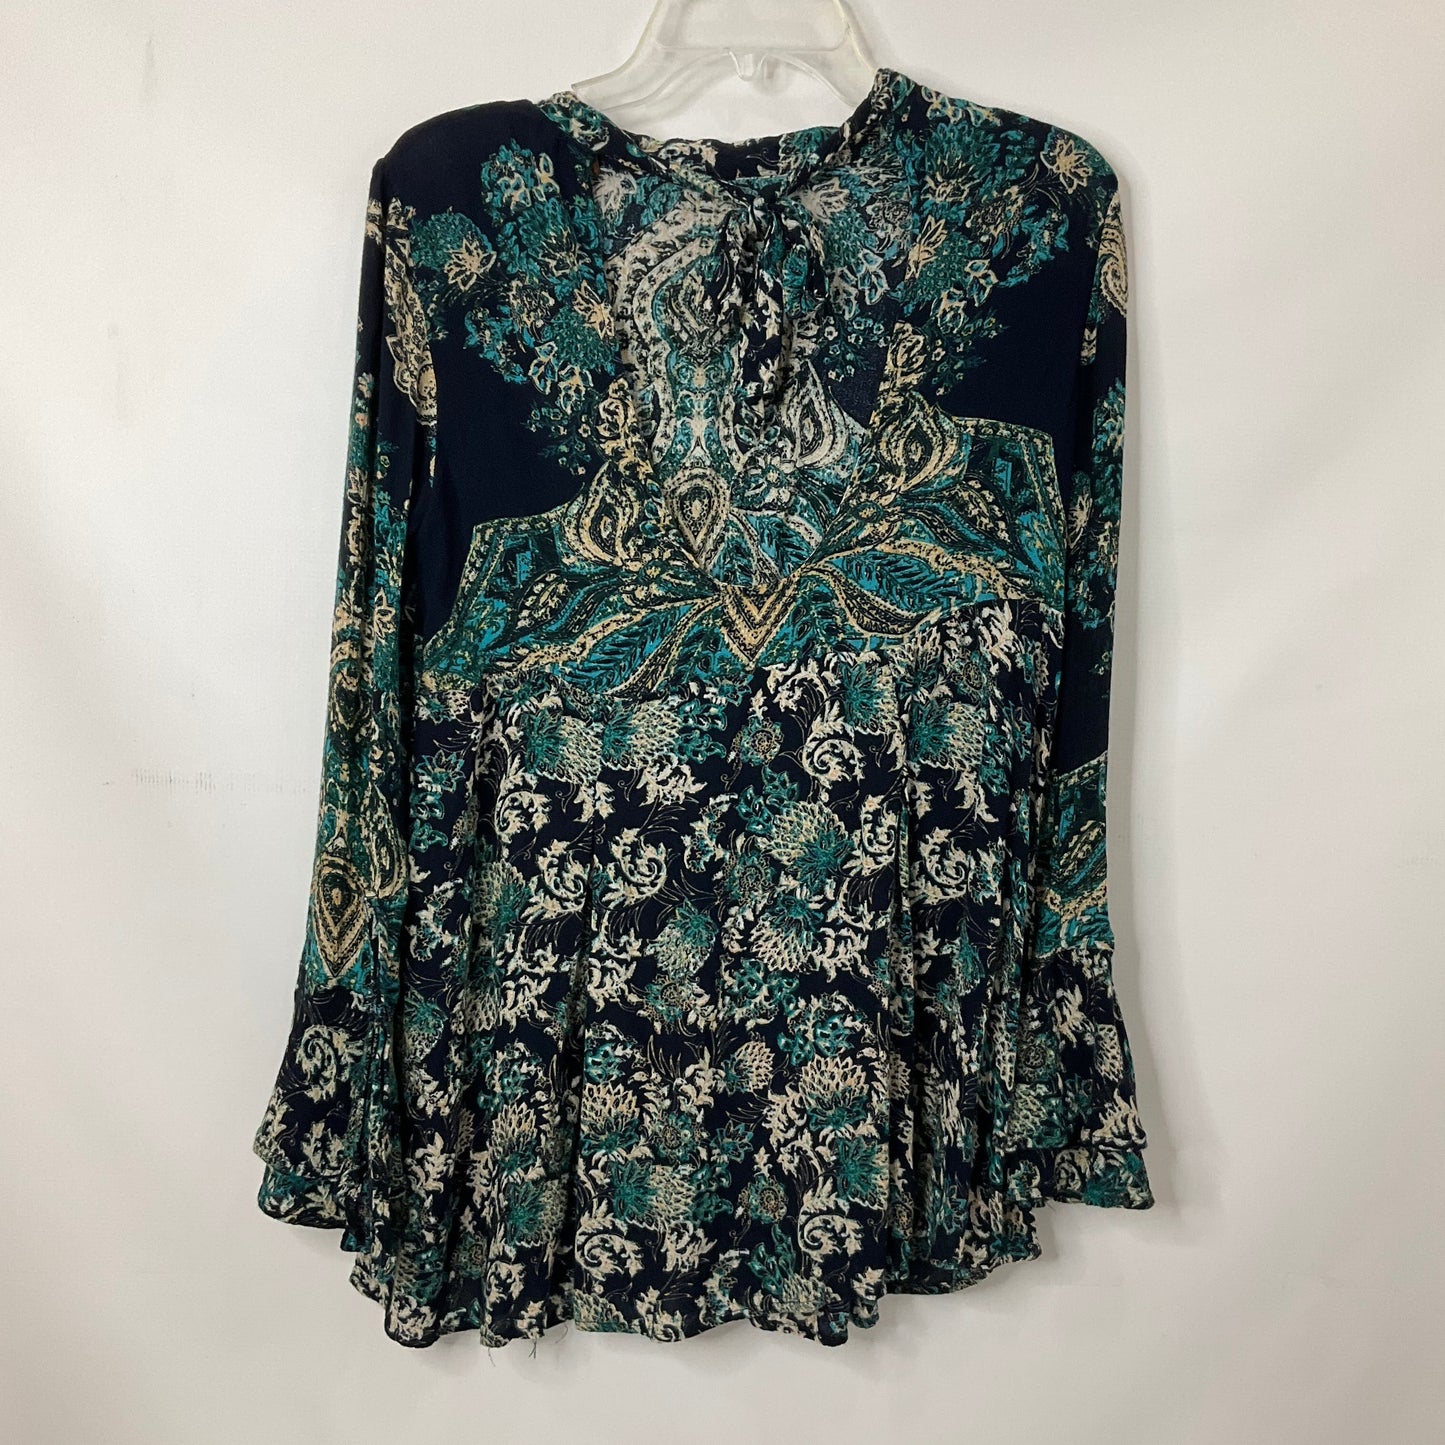 Floral Print Tunic Long Sleeve Free People, Size S